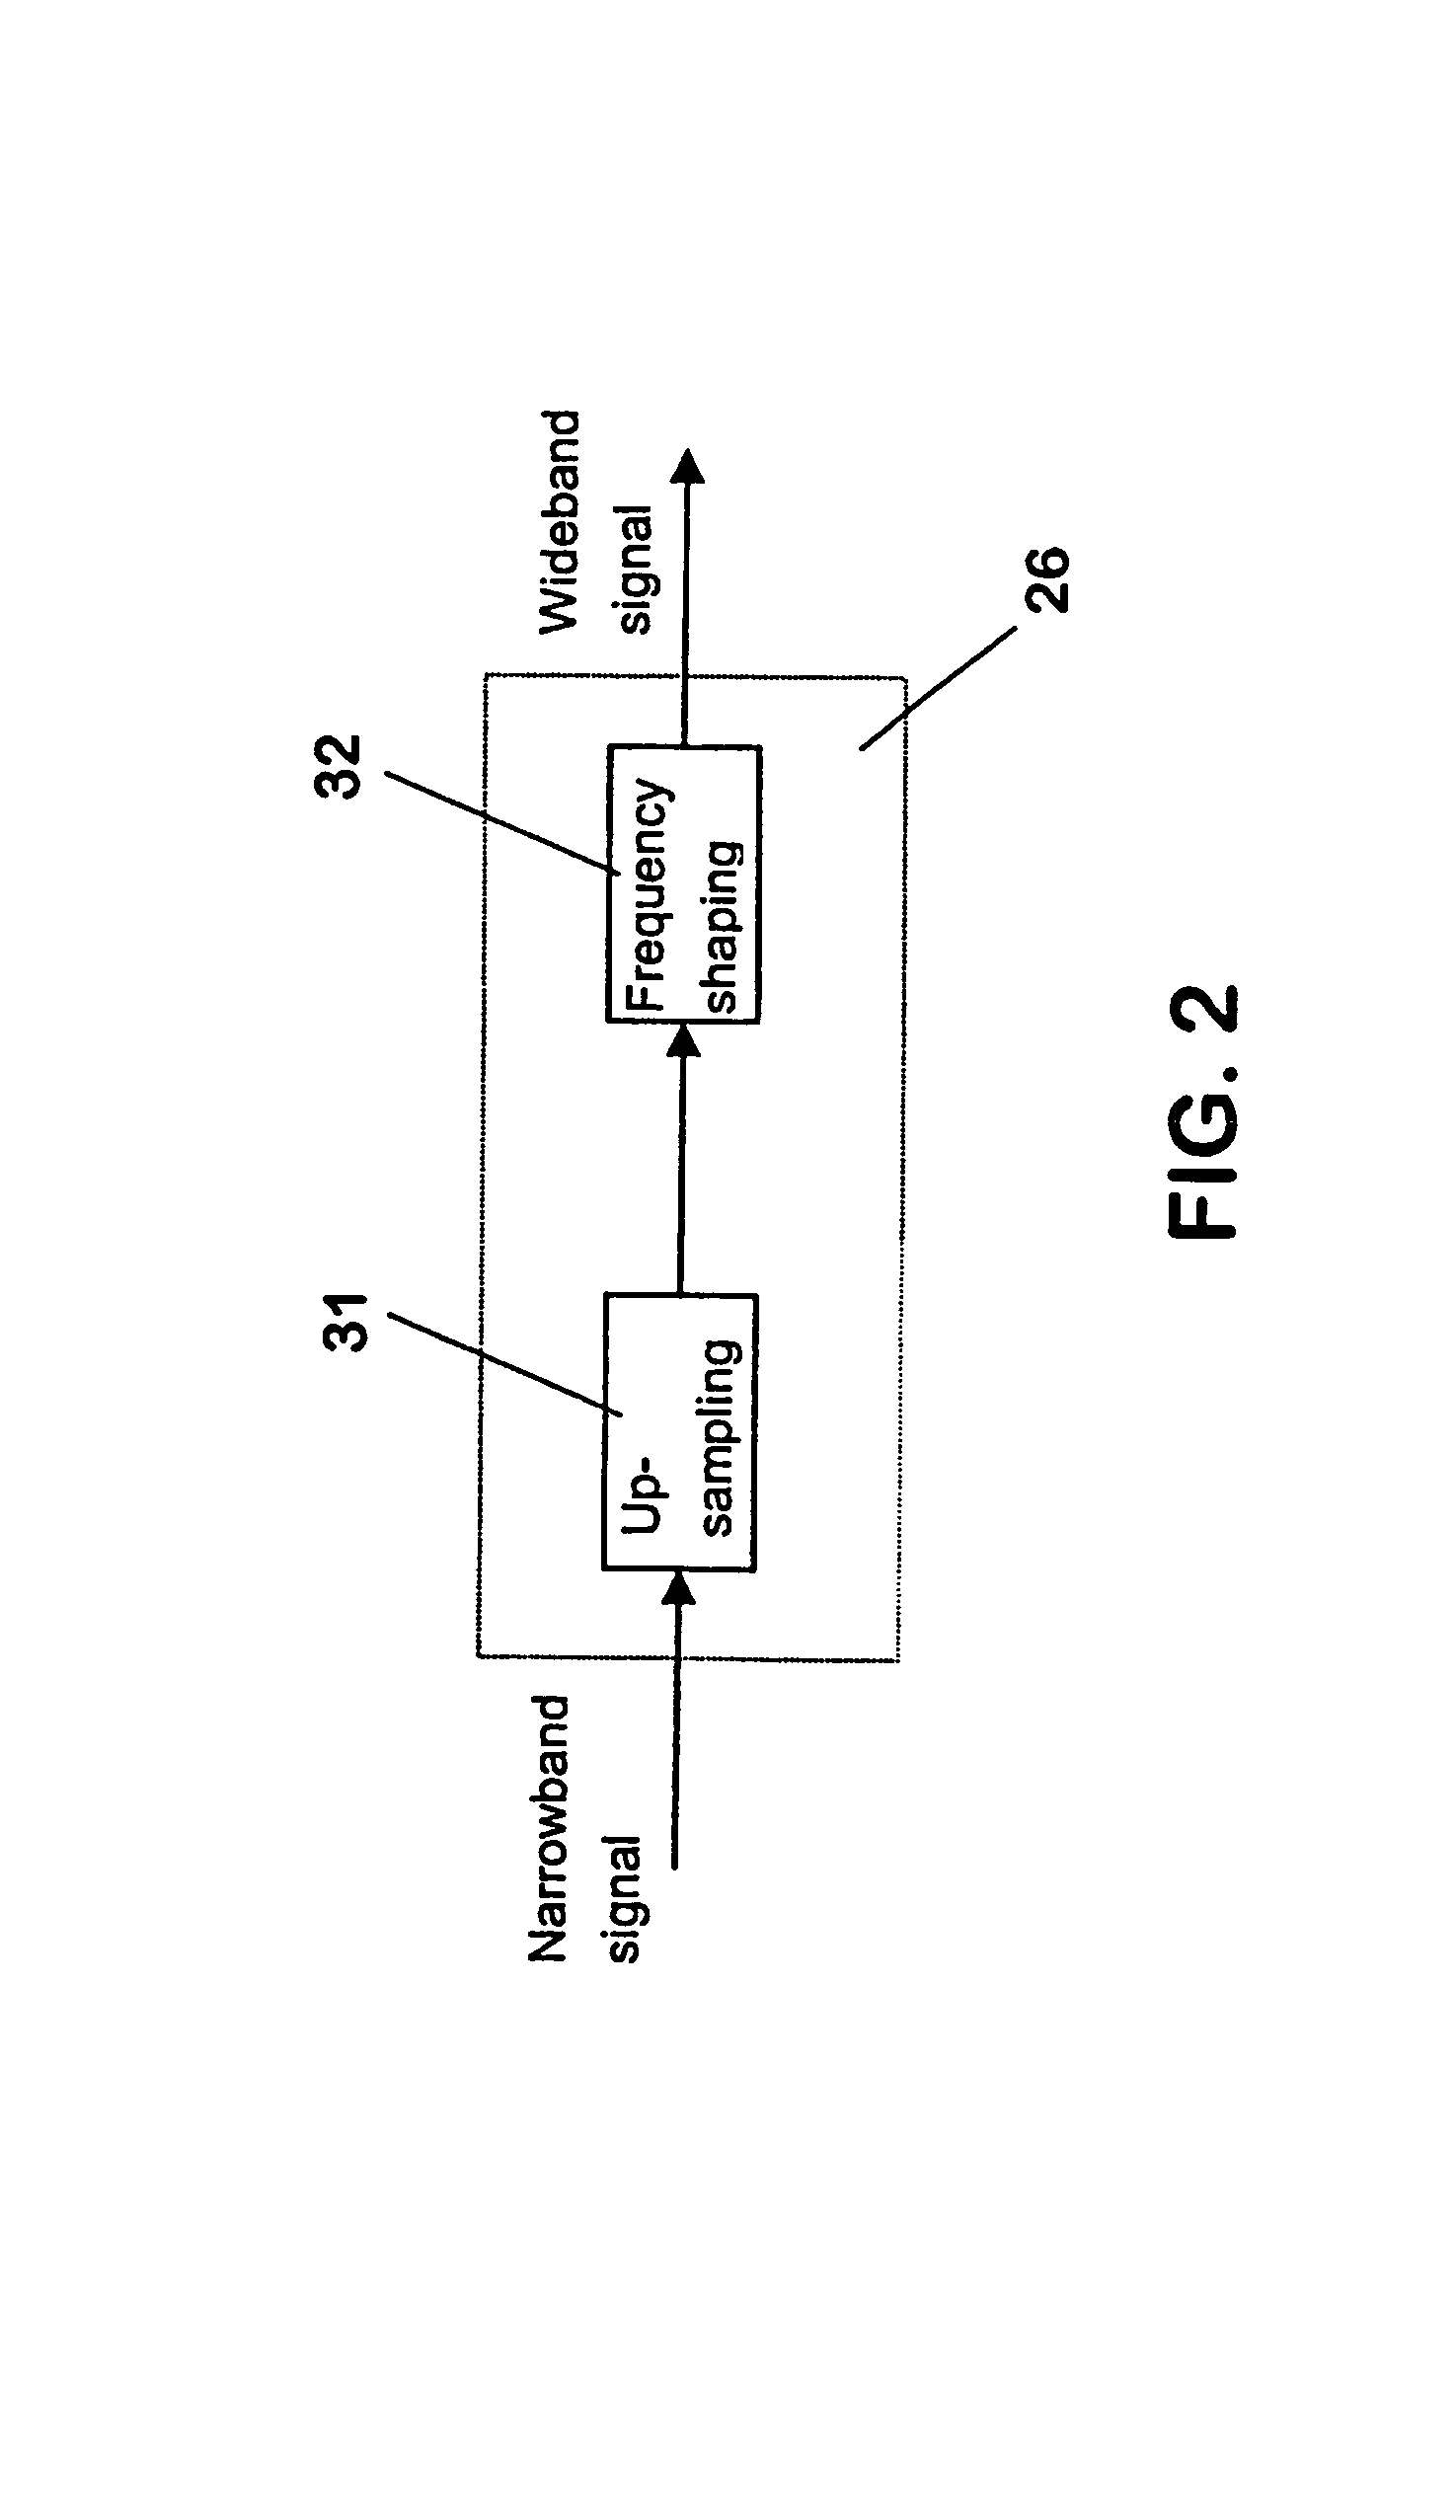 Method for transcoding audio signals, transcoder, network element, wireless communications network and communications system